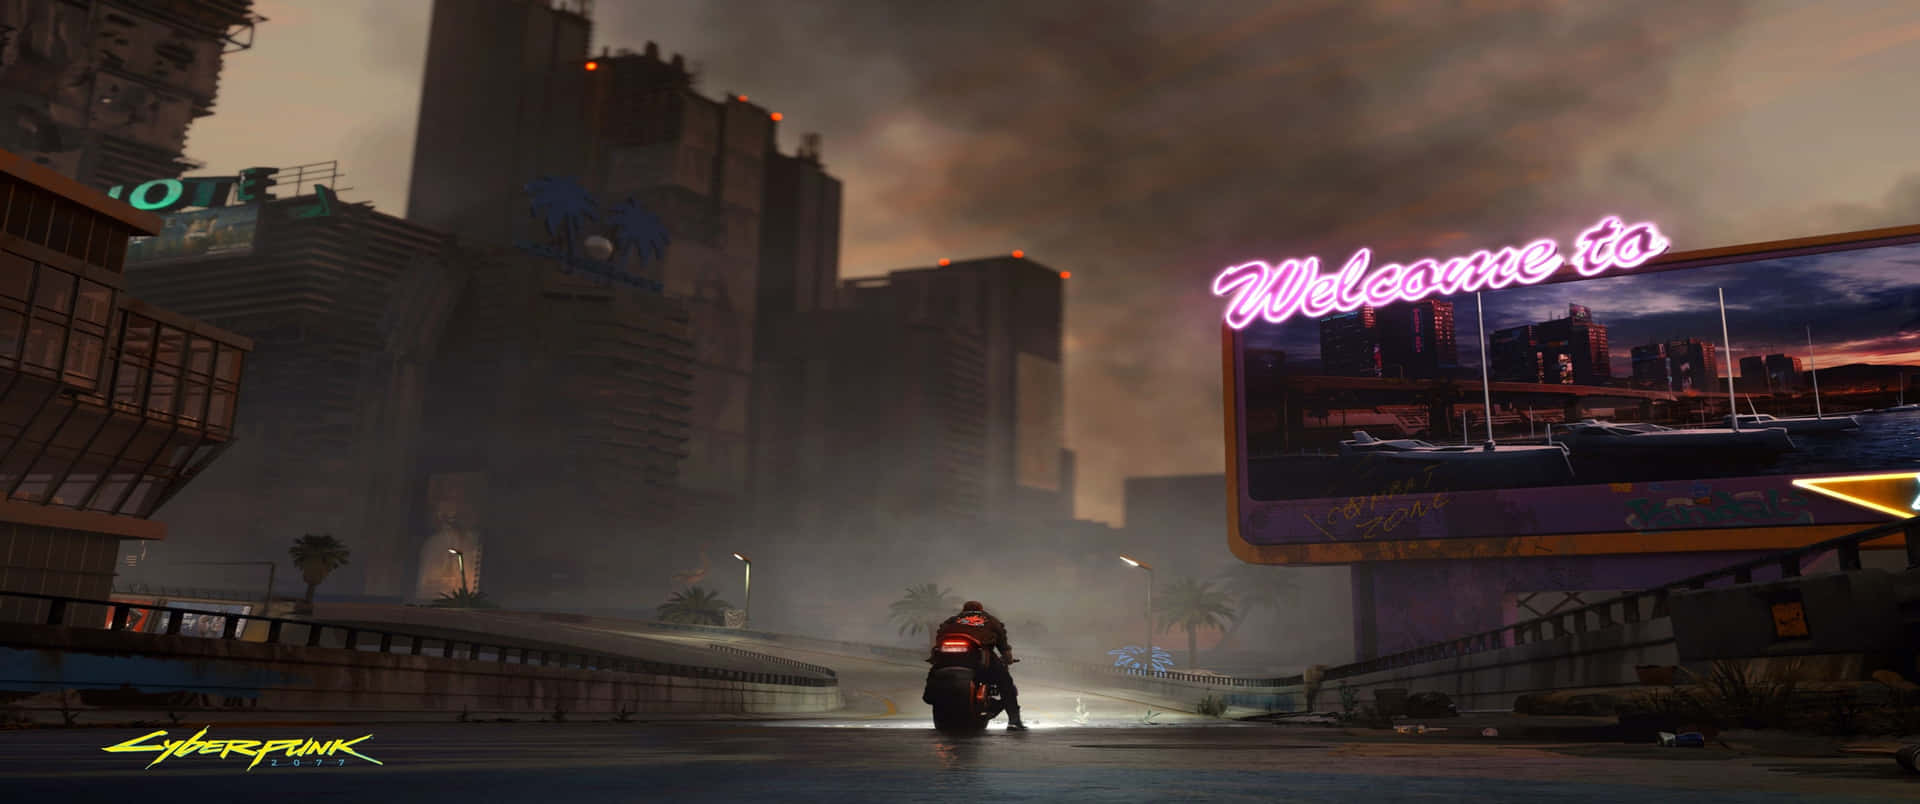 3440x1440p Cyberpunk 2077 Background Parked Motorcycle Welcome Sign